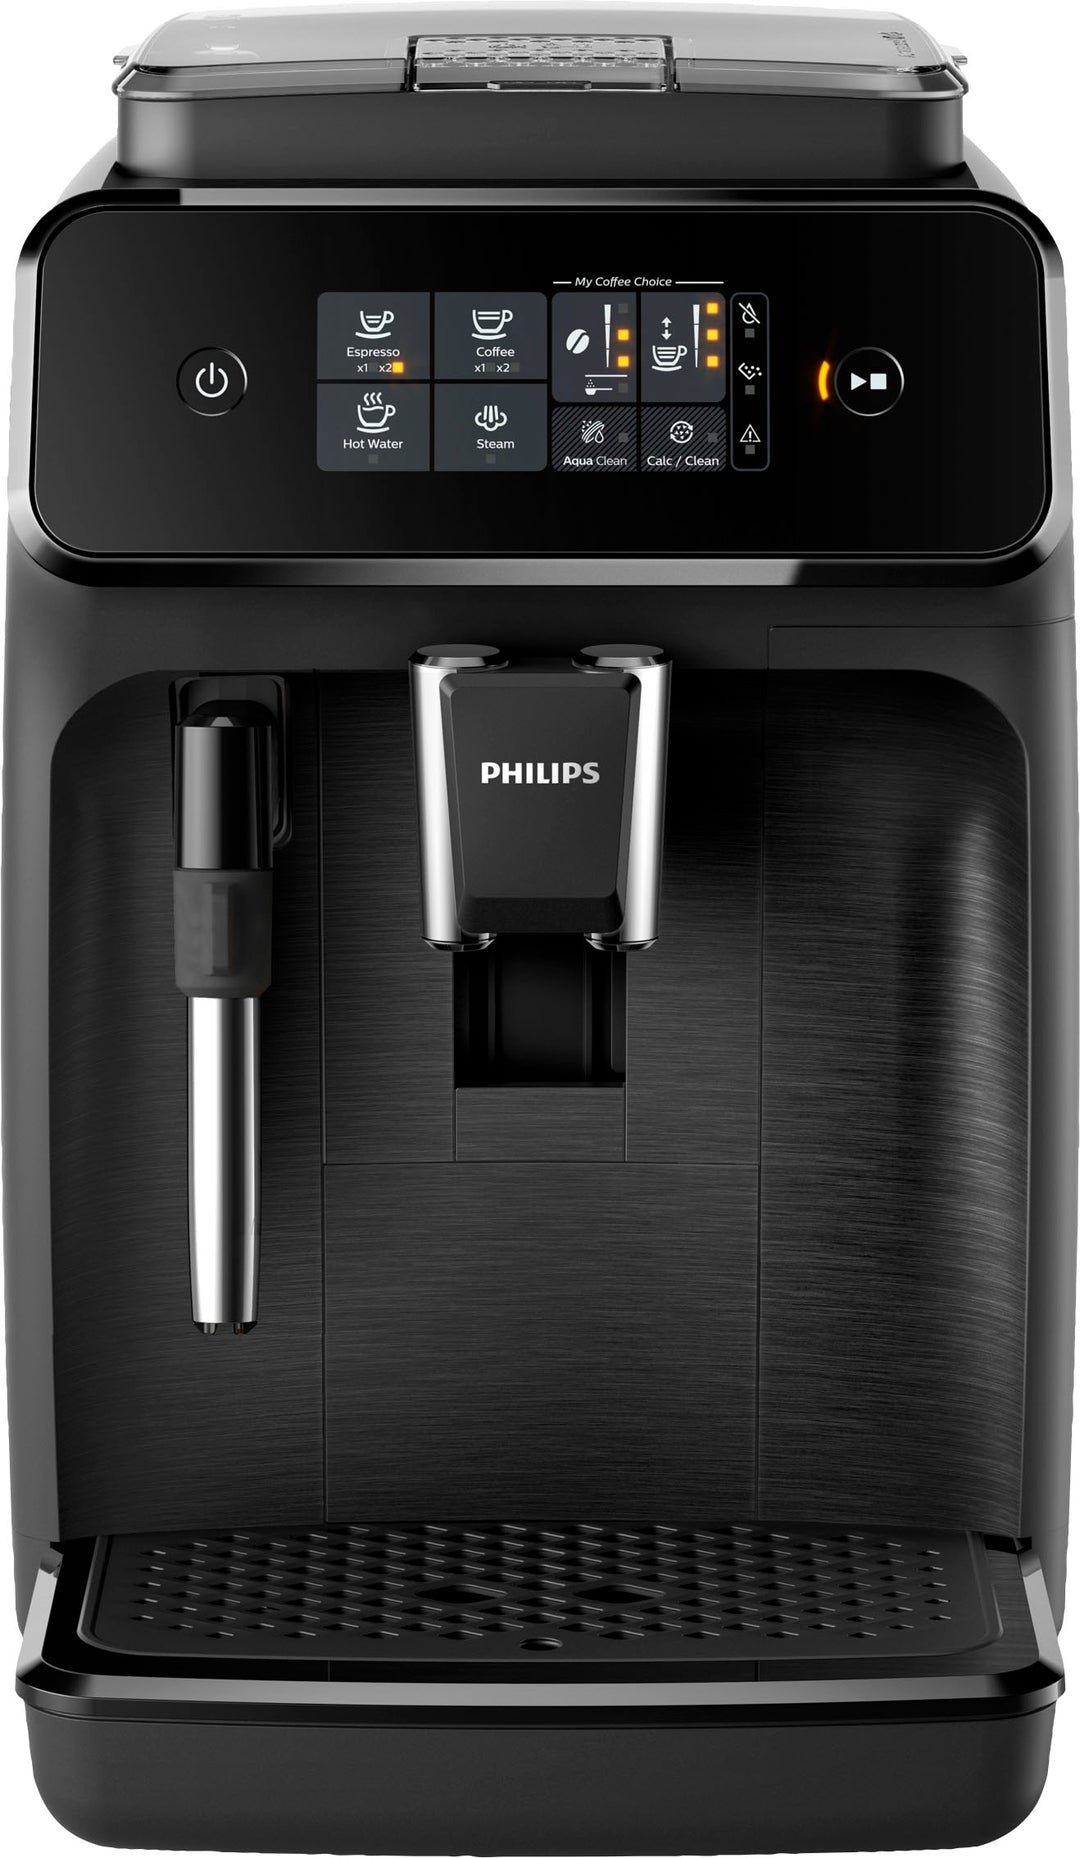 Philips 1200 Series Fully Automatic Espresso Machine with Milk Frother - Black_2